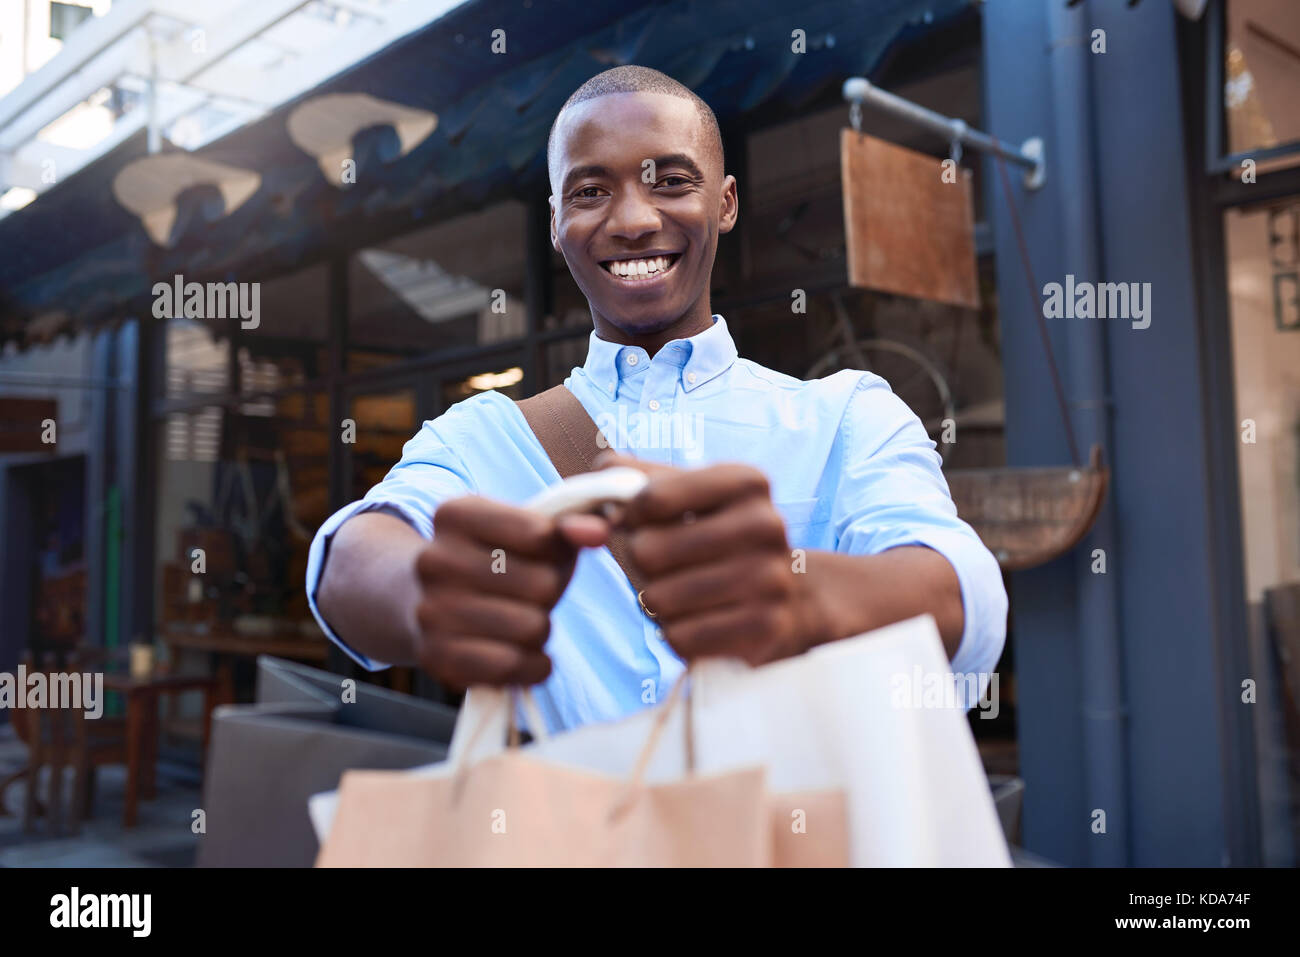 Stylish young man standing outside holding up shopping bags Stock Photo